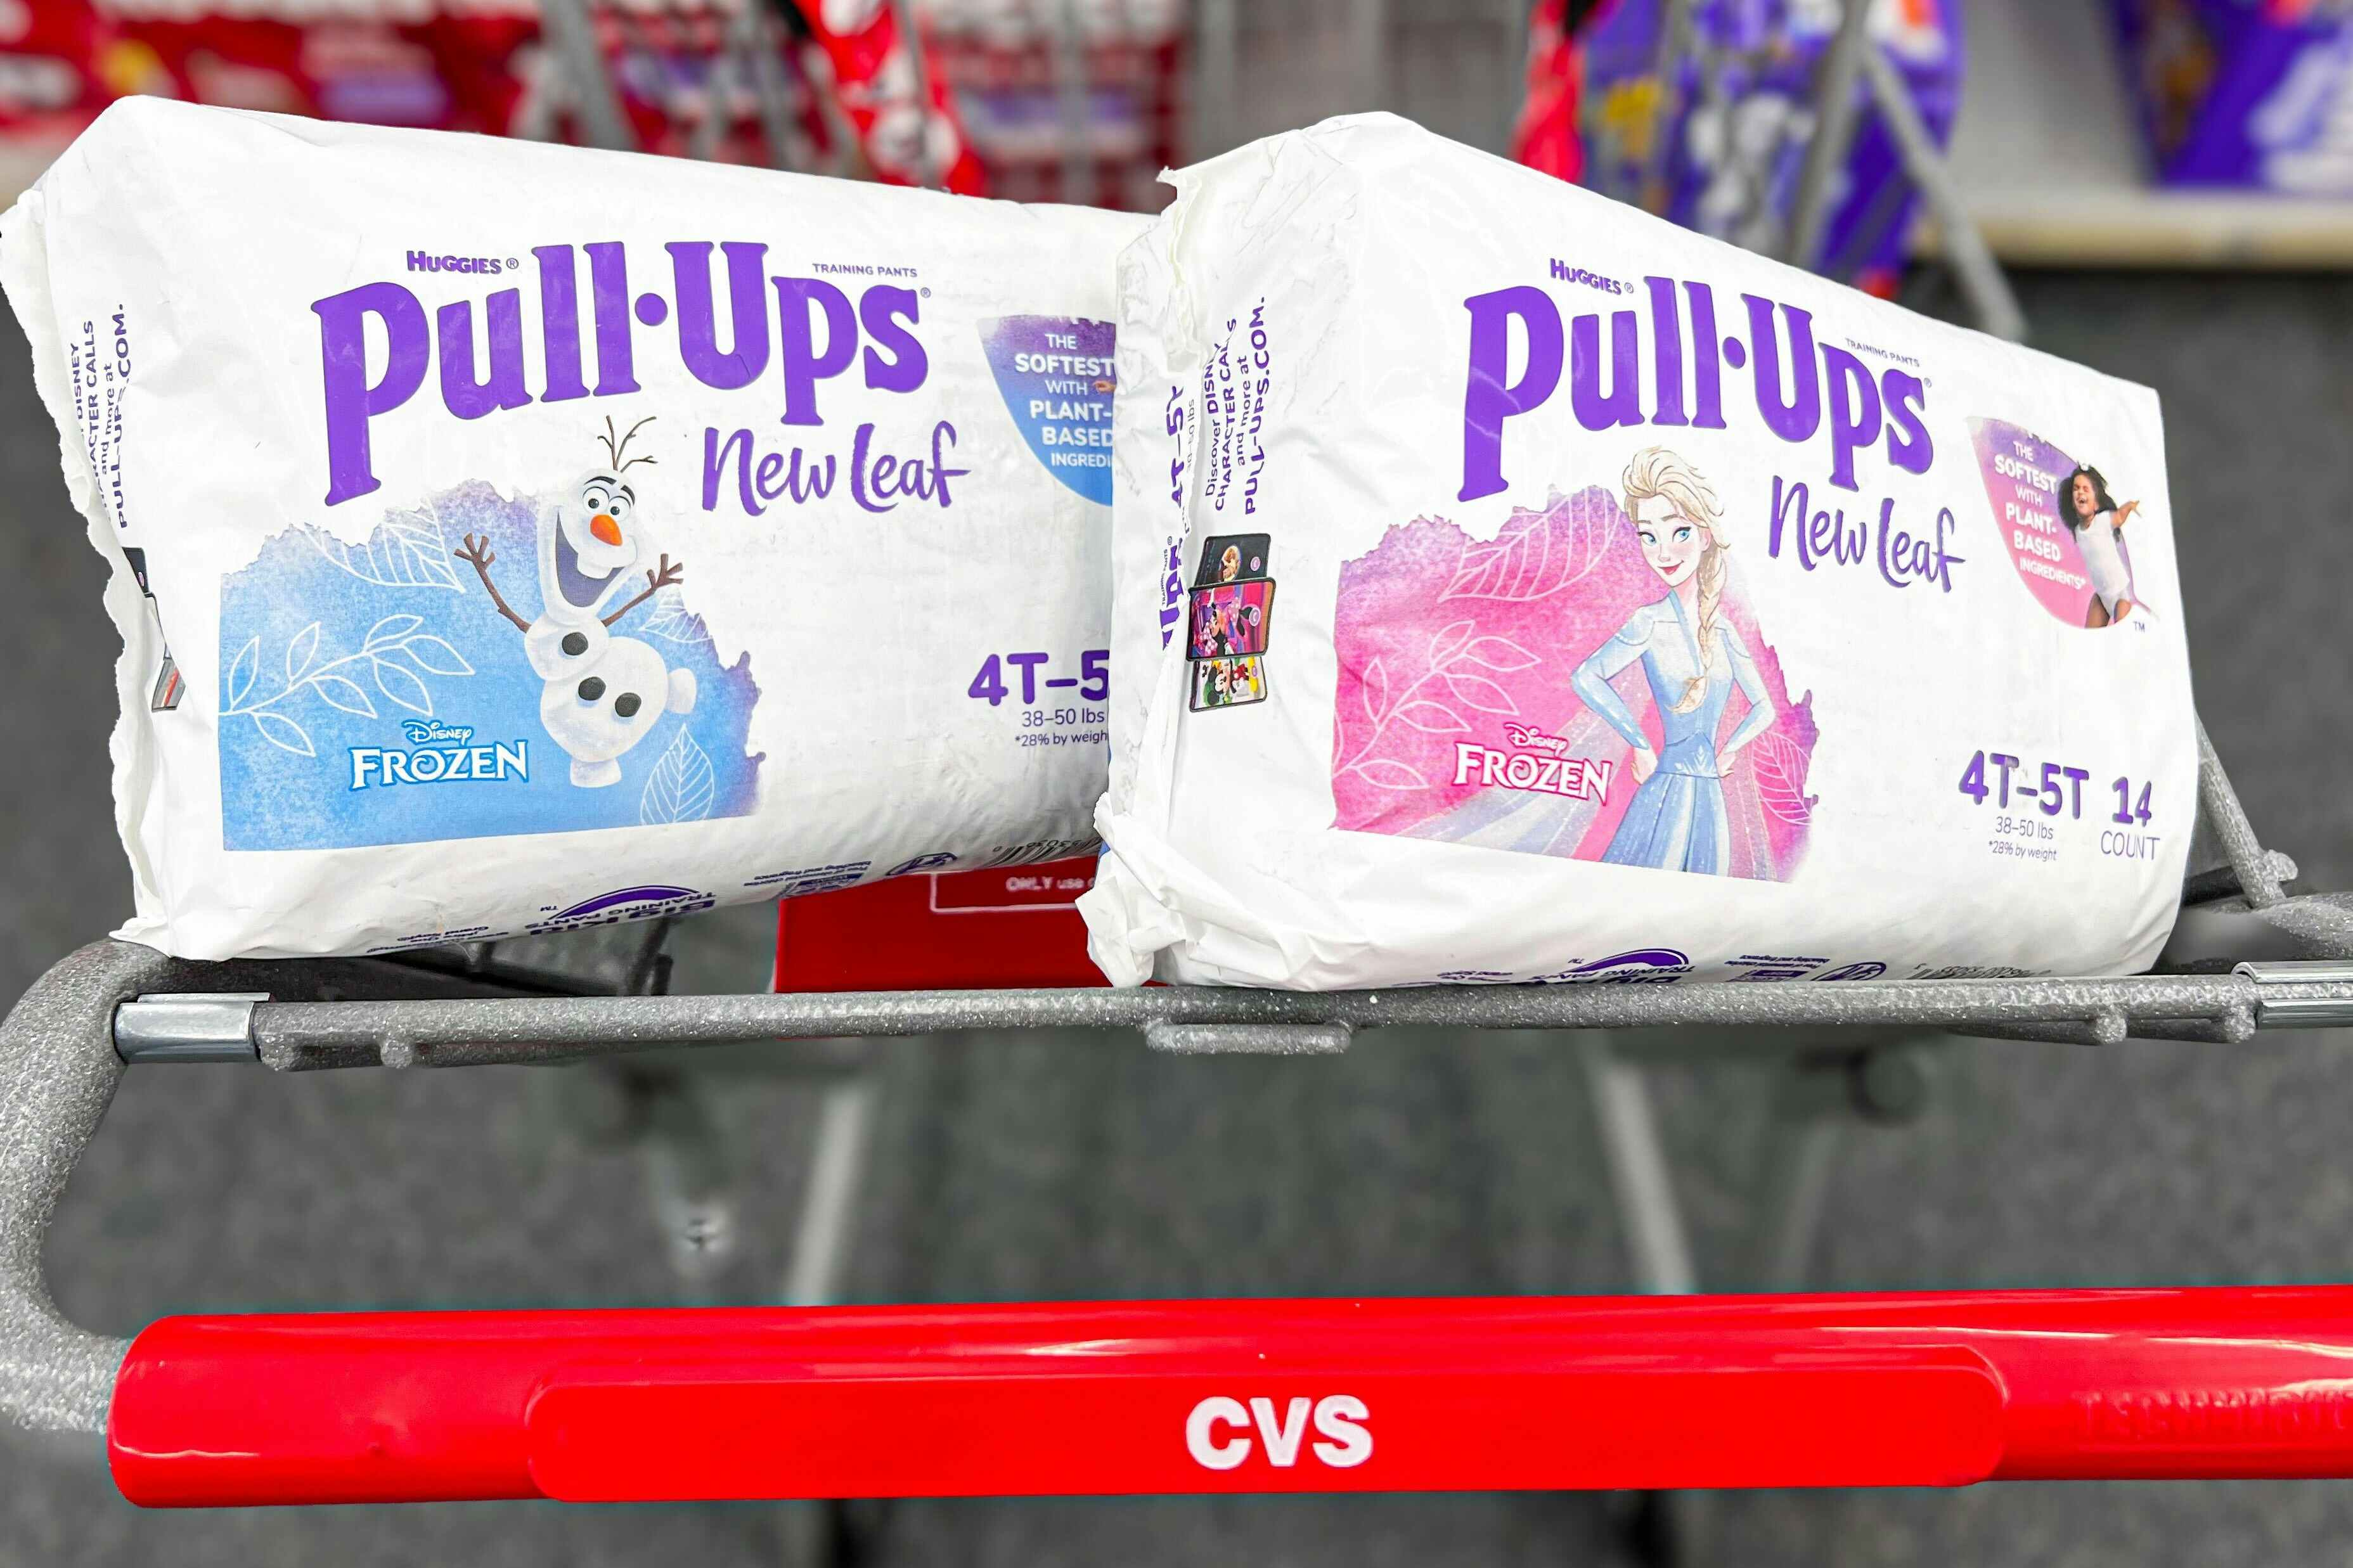 Clearance Find: Up to 75% Off New Leaf Pull-Ups at CVS (Check Your Store)